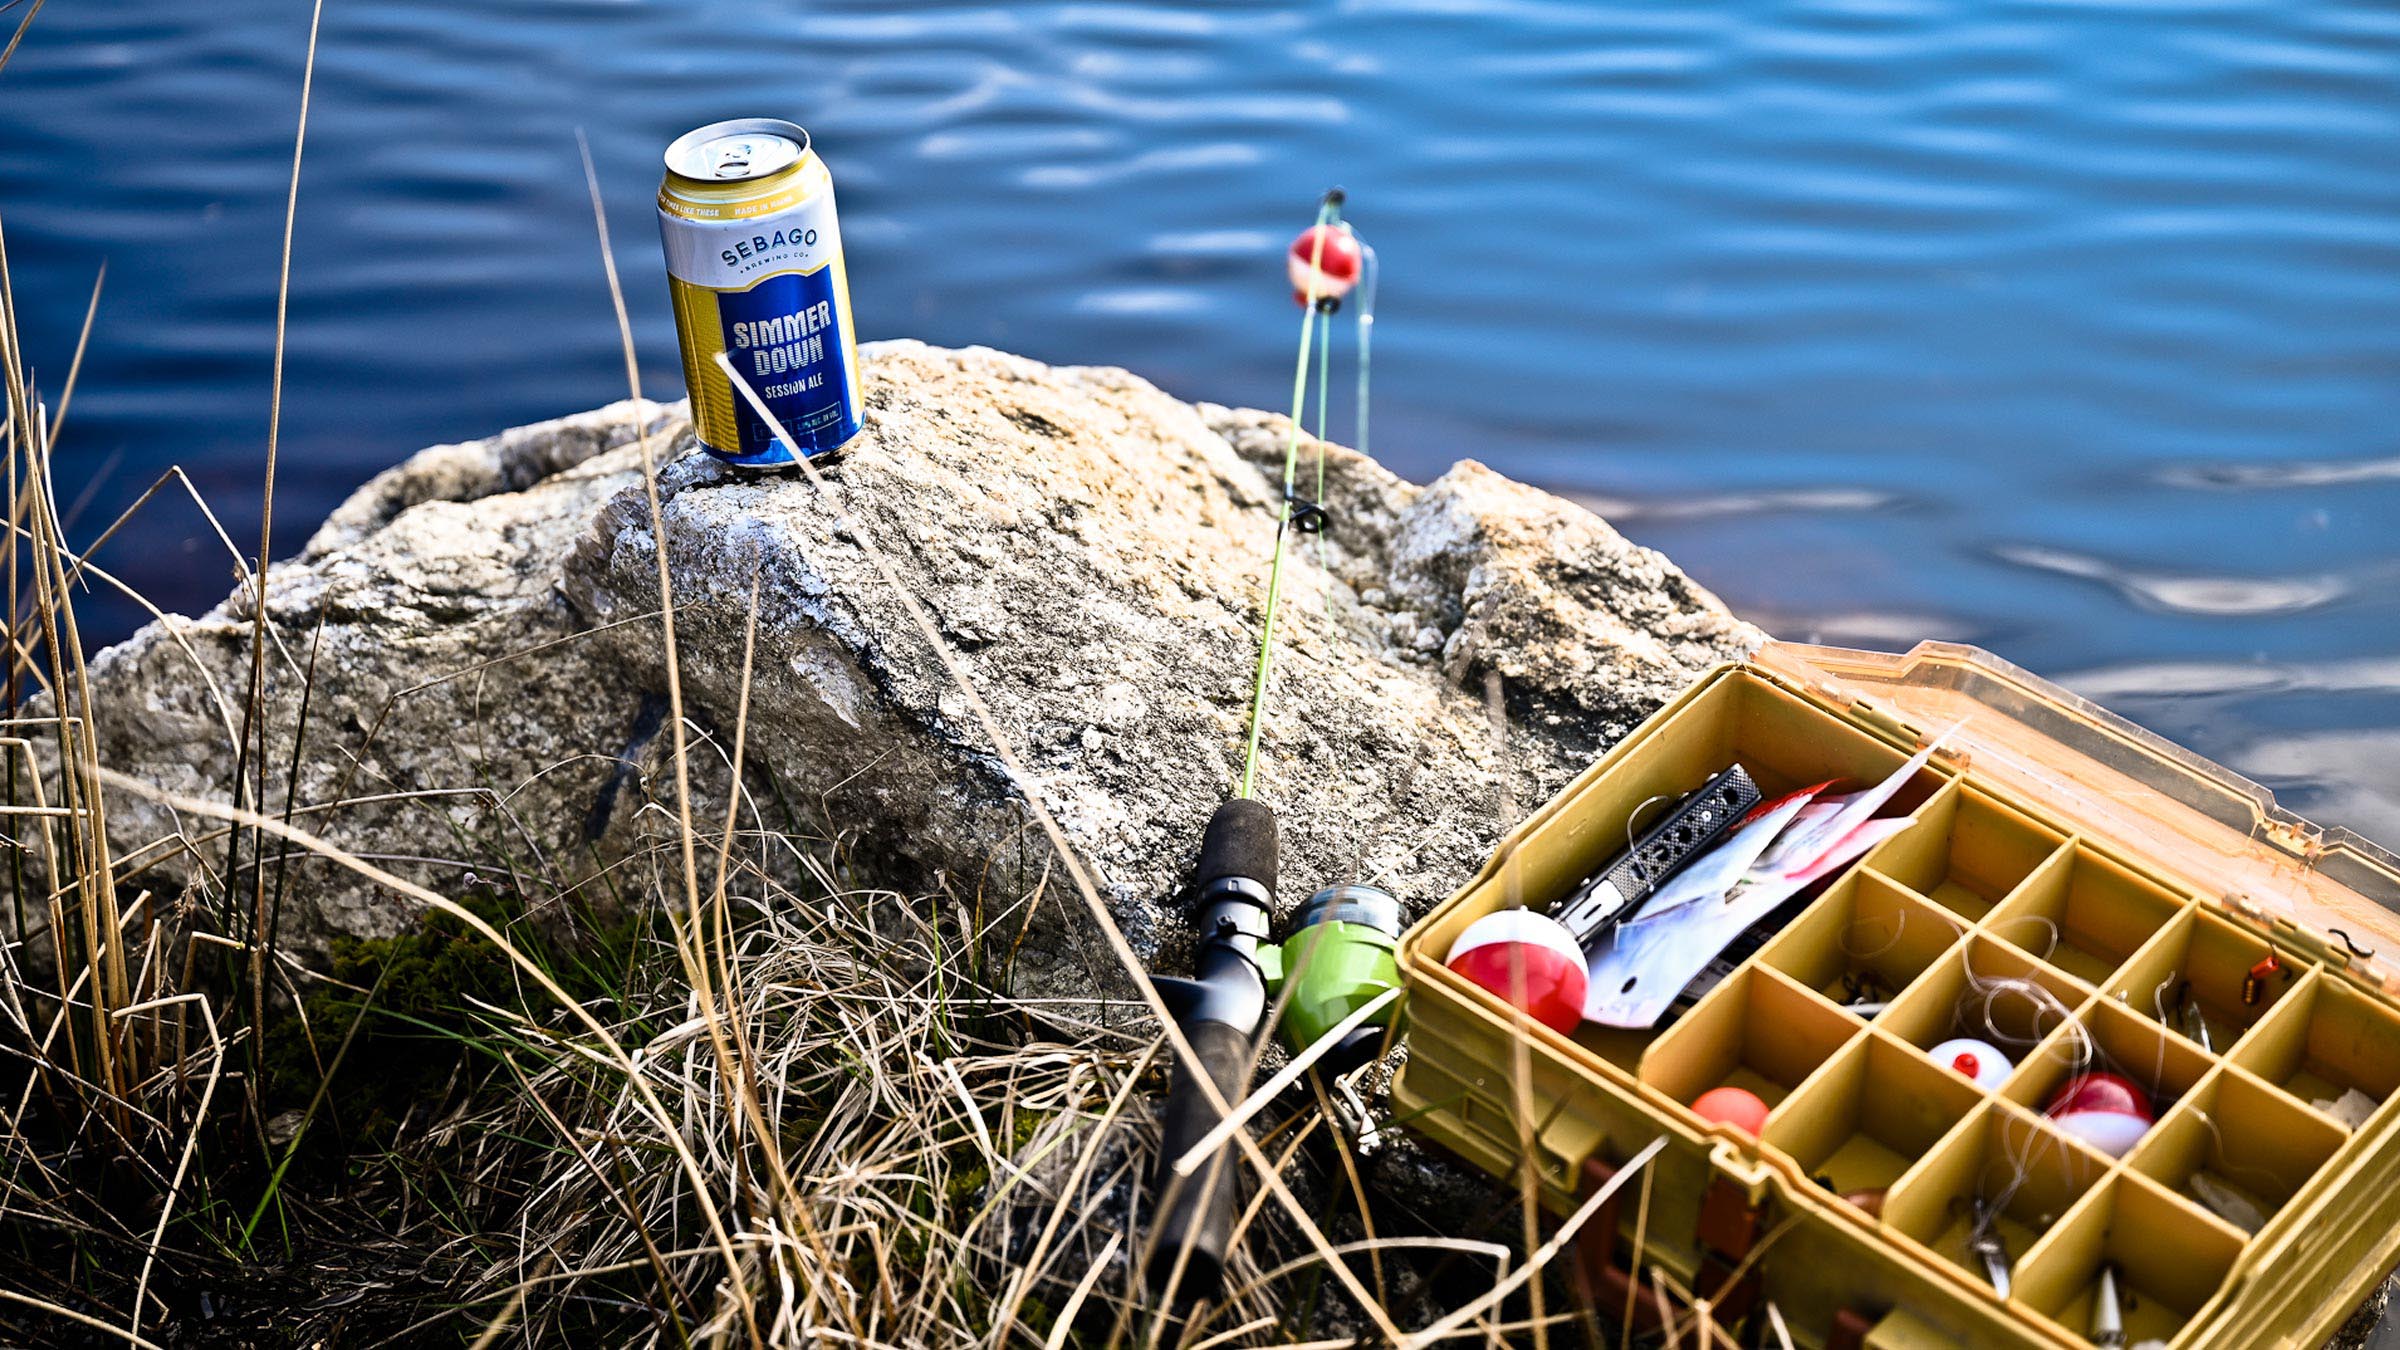 Sebago Brewing Simmer Down Beer can by fishing gear